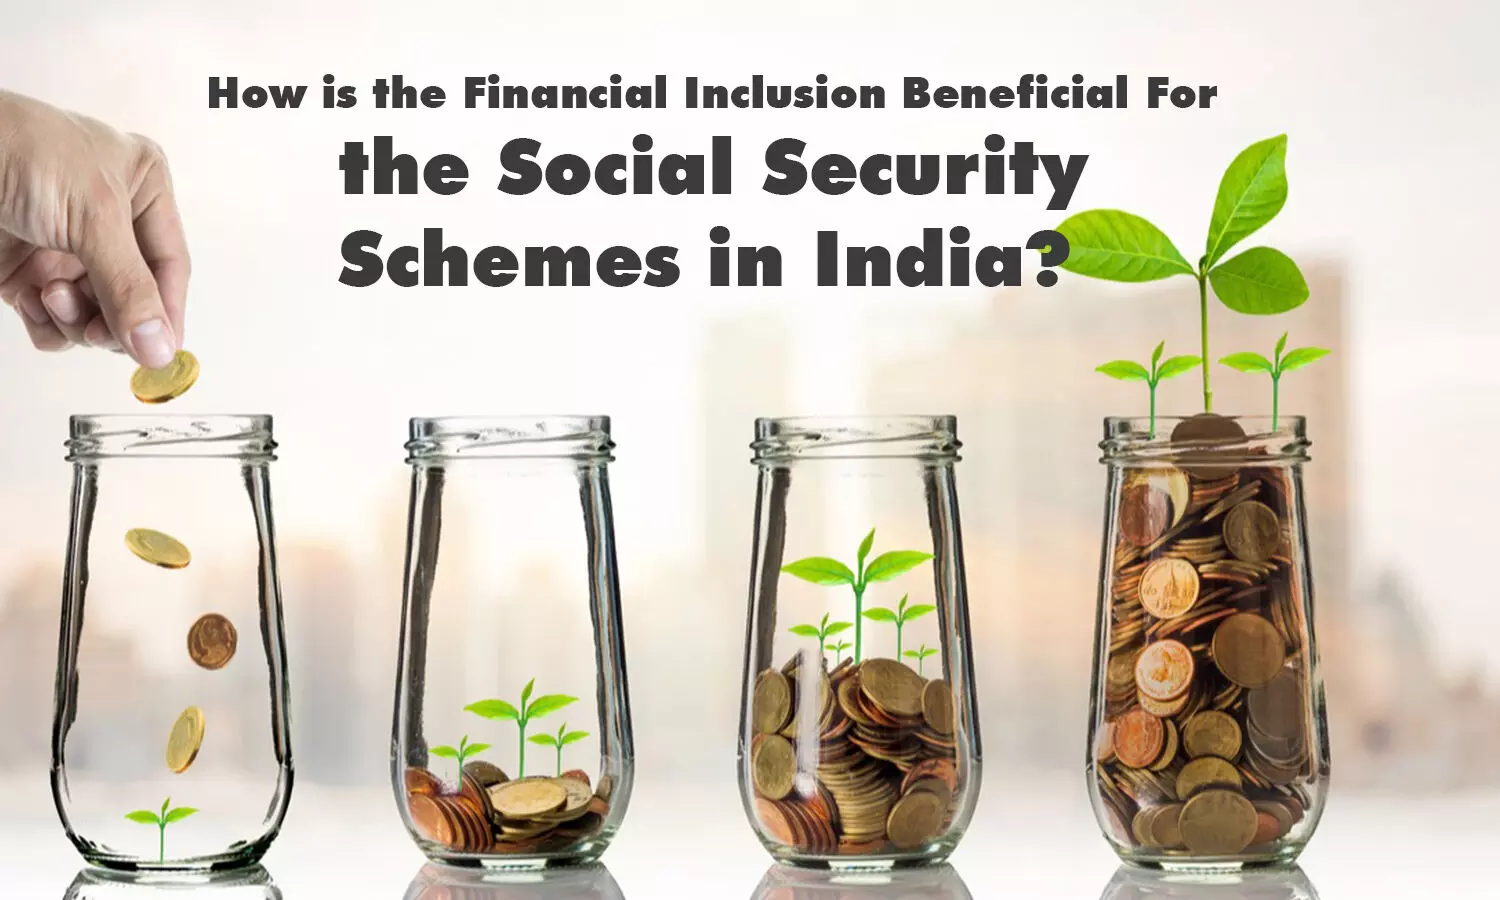 How is the Financial Inclusion Beneficial For the Social Security Schemes in India?